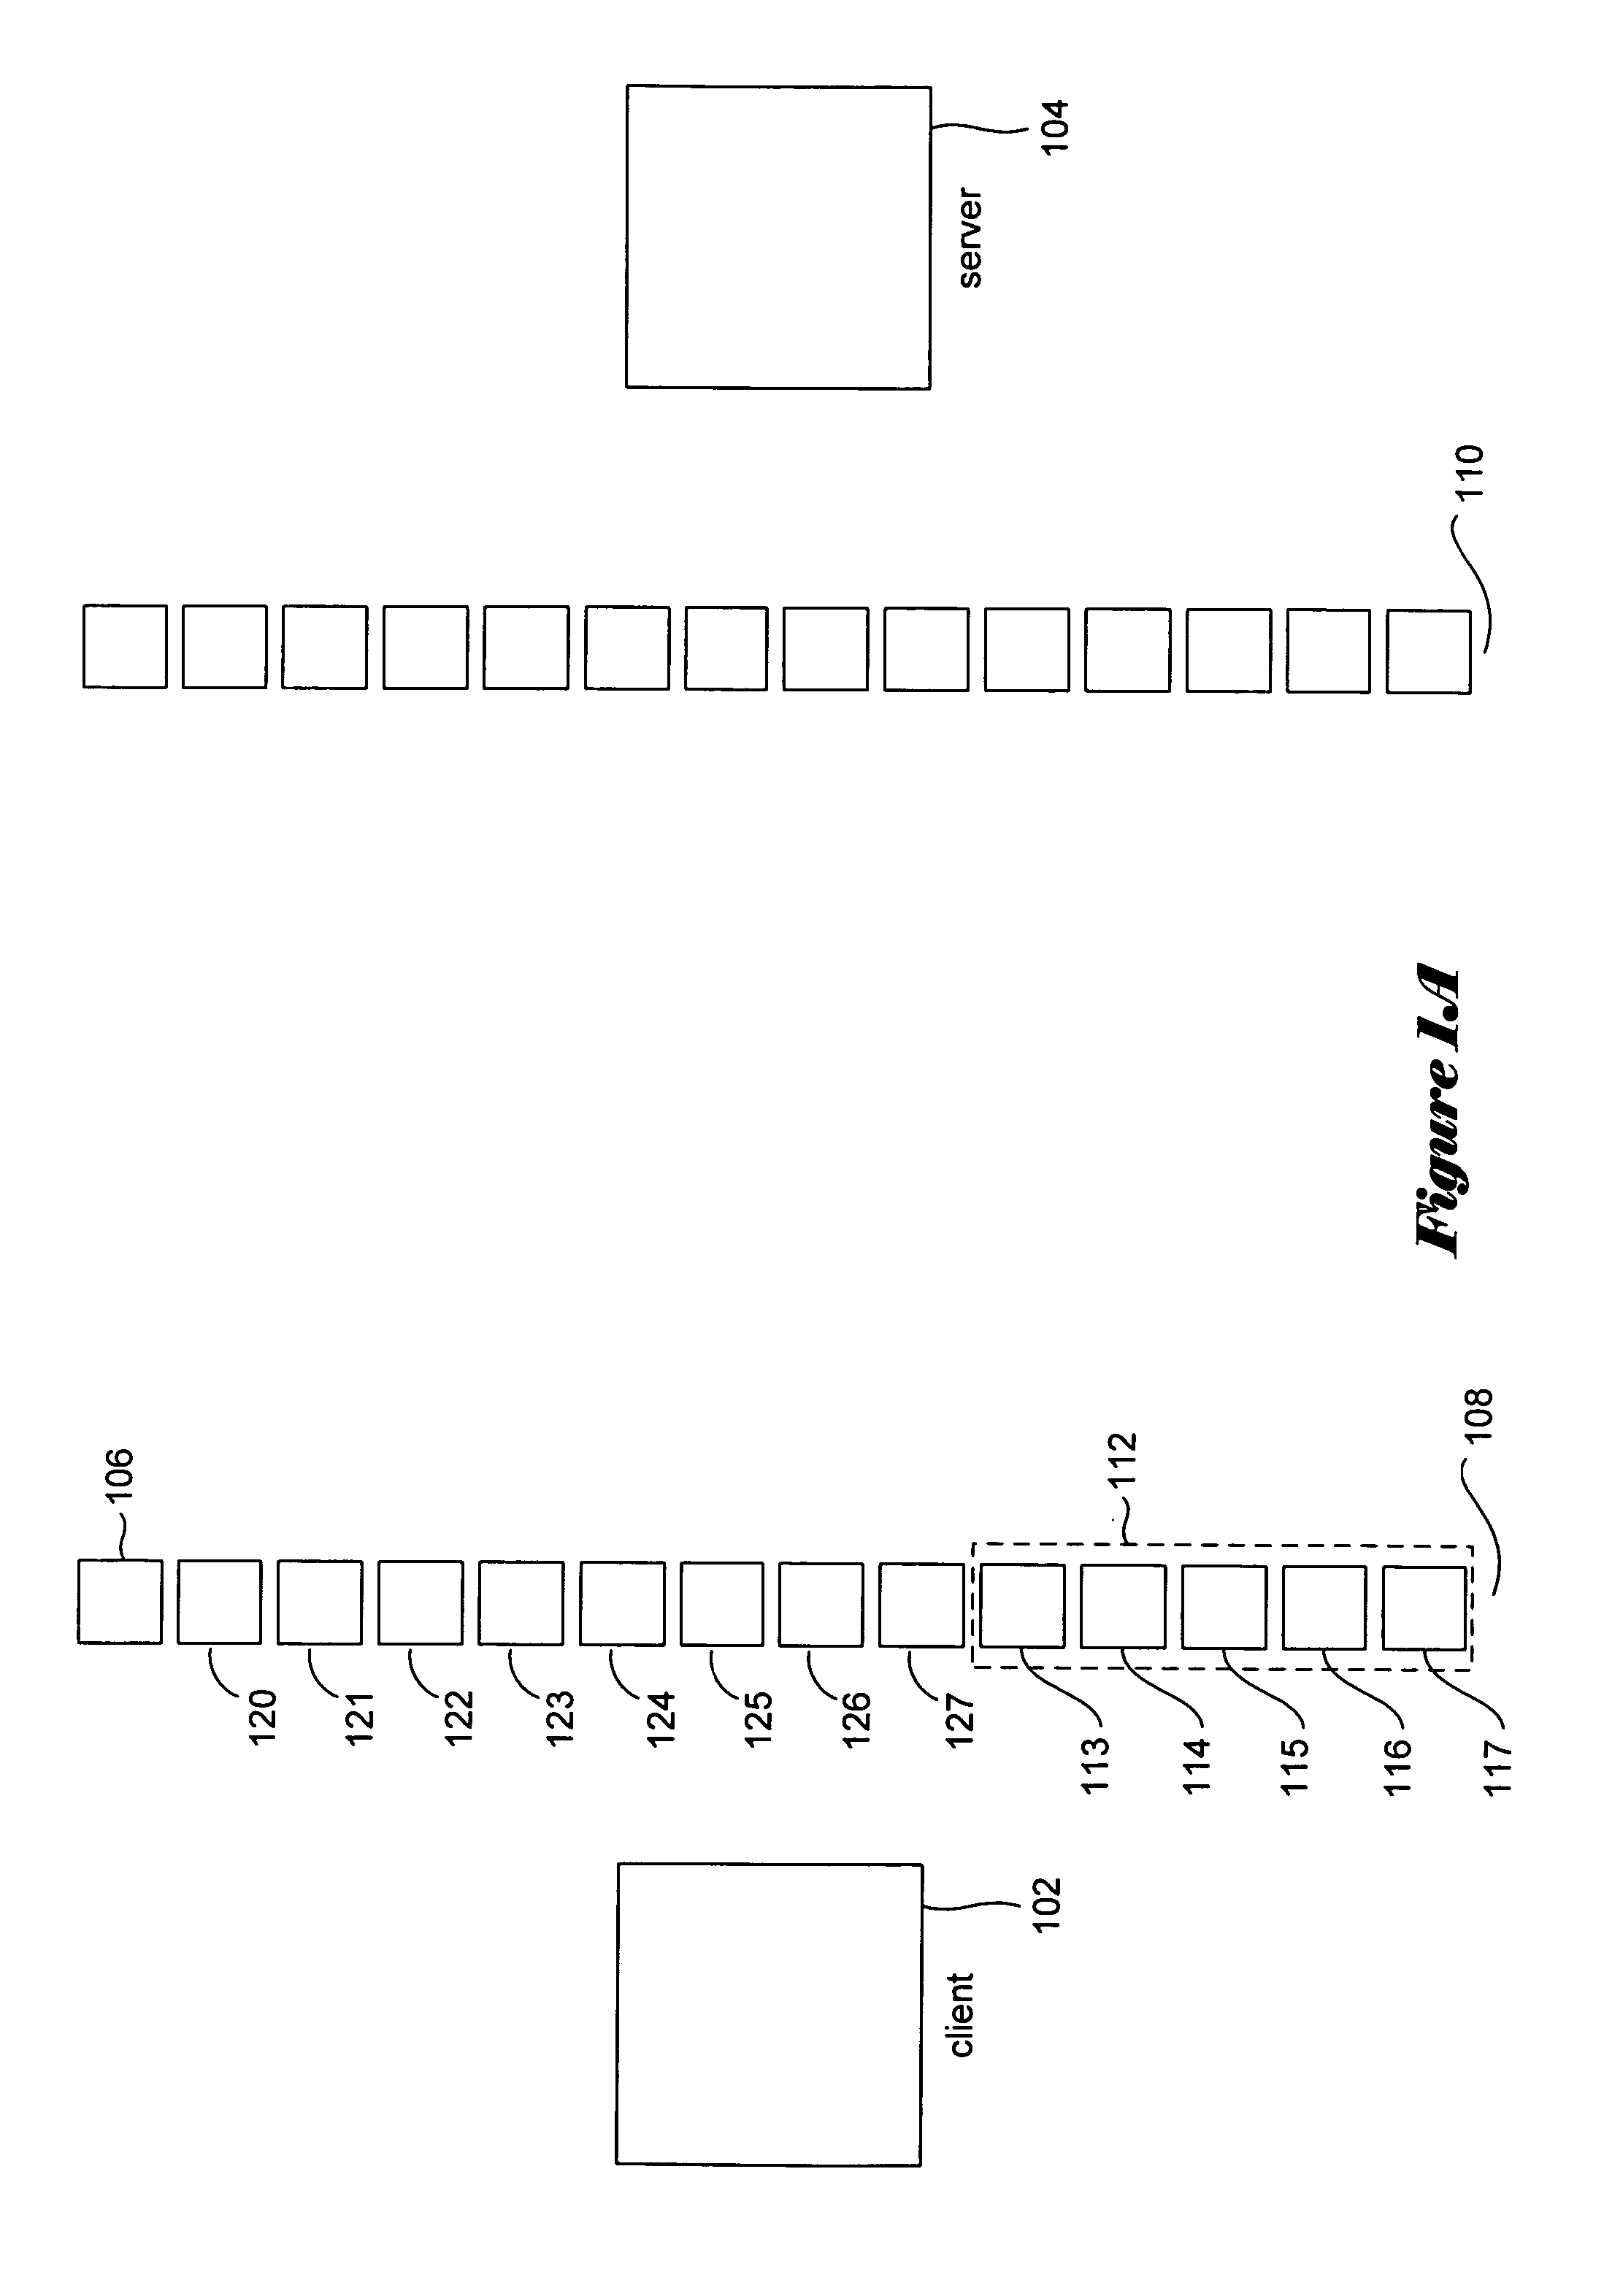 Method and system for reallocating computational resources using resource reallocation enabling information